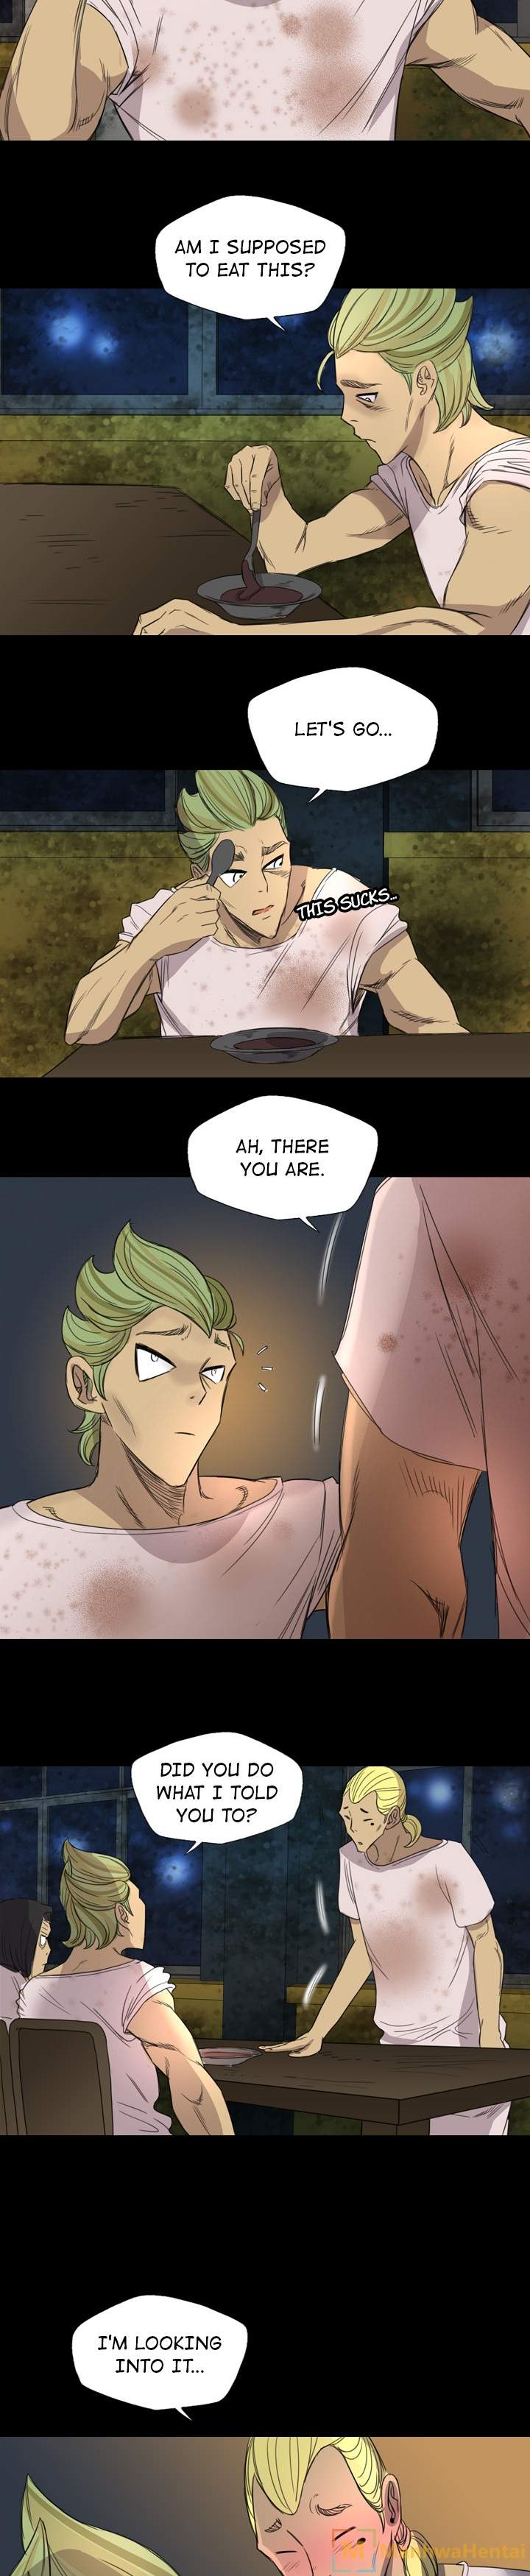 Prison Island - Chapter 5 Page 3